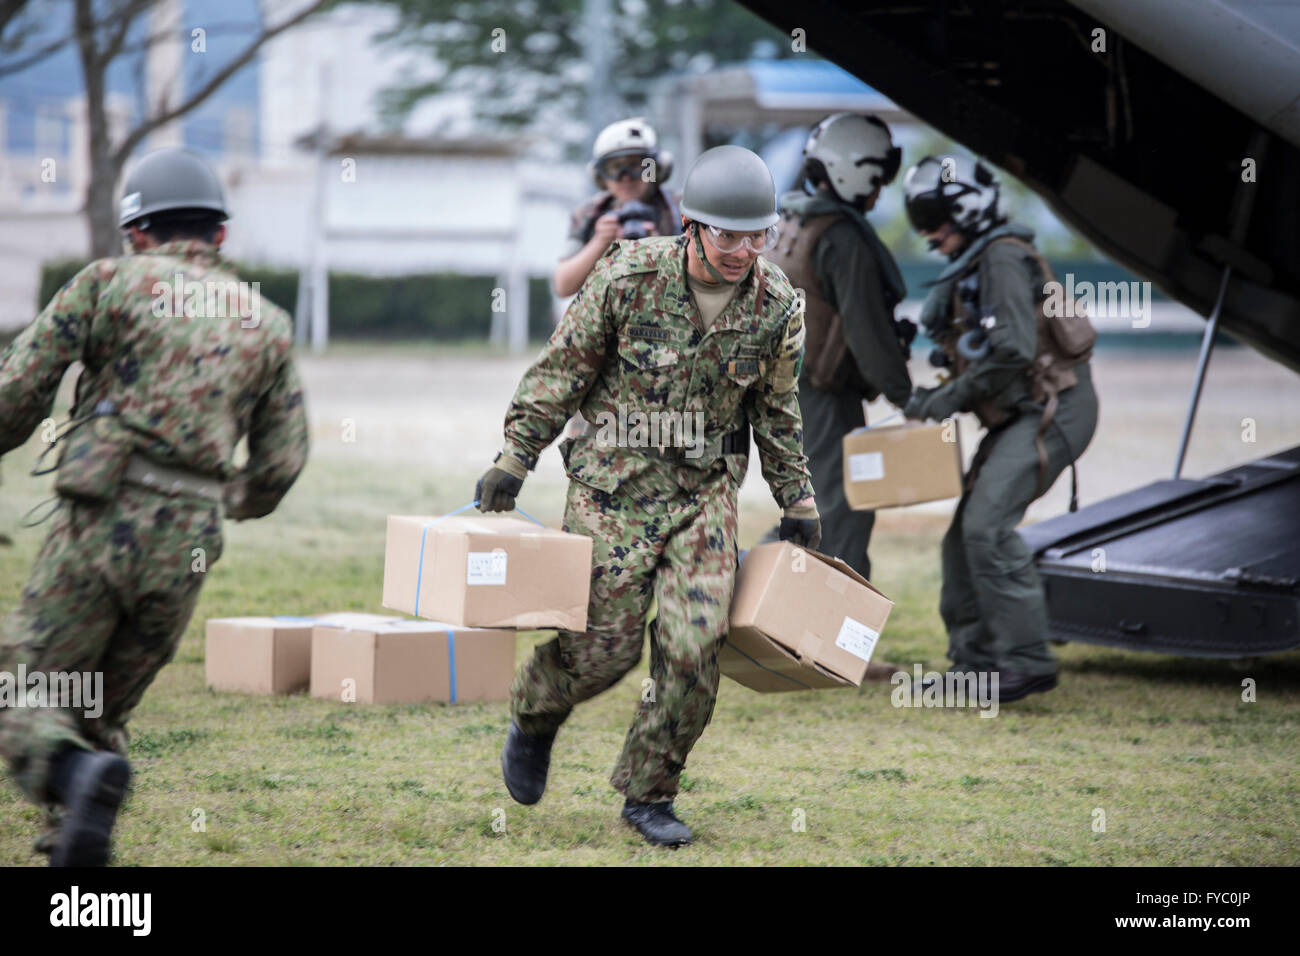 Japanese Self-Defense land force soldiers unloading humanitarian aid for those affected by recent earthquakes from a U.S. Marine Corps Osprey aircraft in Kumamoto April 18, 2016 Takayubaru, Japan. The U.S joined thousands of Japanese troops to help victims of two massive earthquakes that struck the Kyushu region. Stock Photo